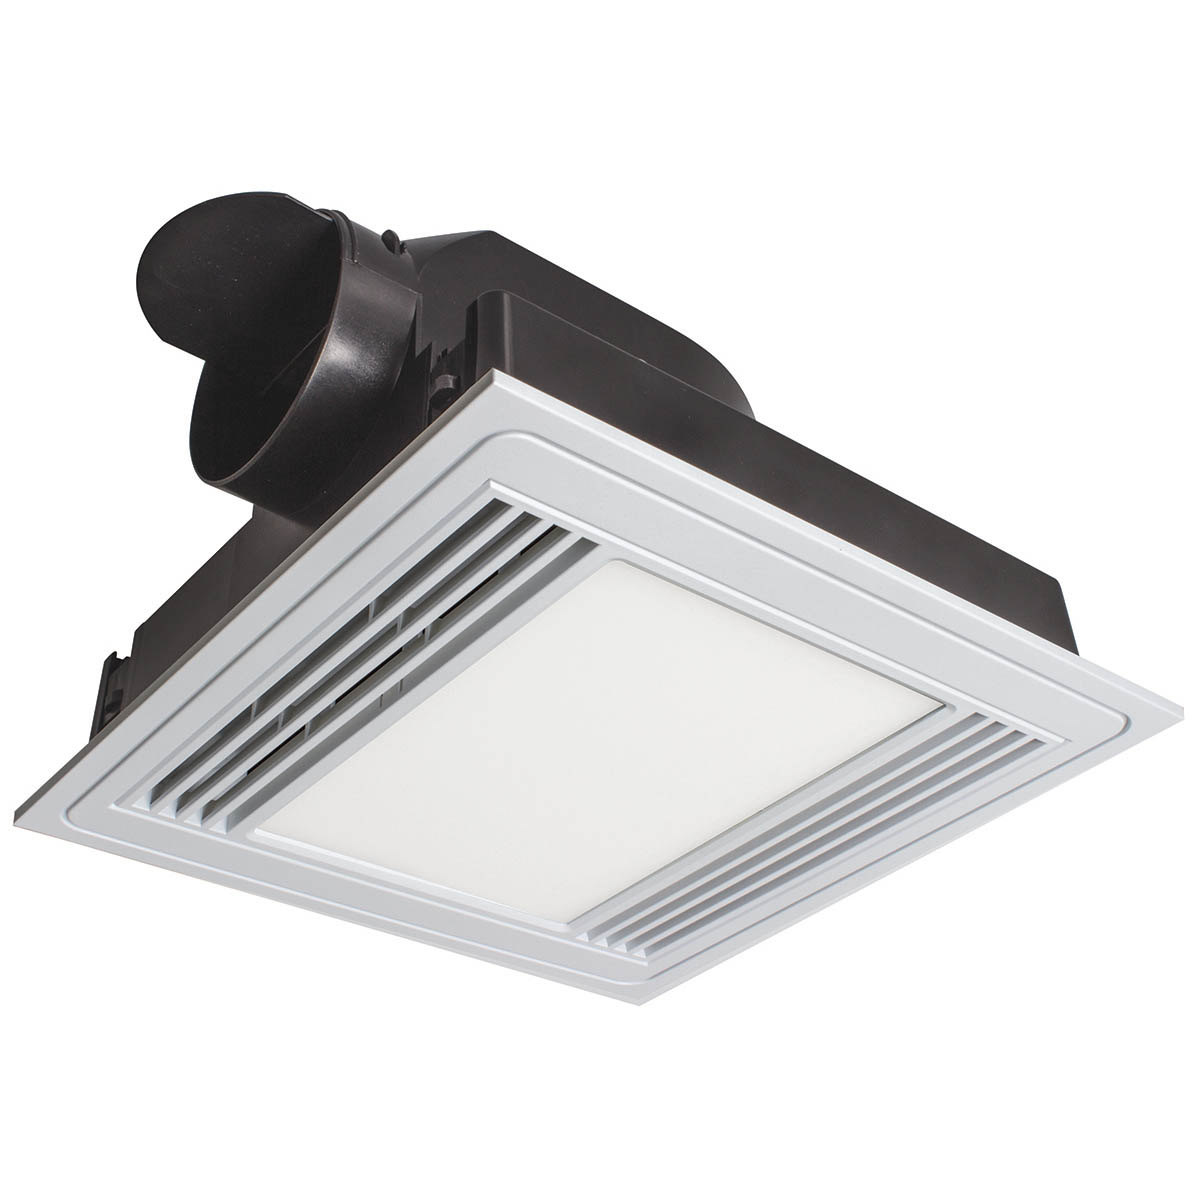 Tercel Exhaust Fan With Led Light Brilliant Lighting for size 1200 X 1200